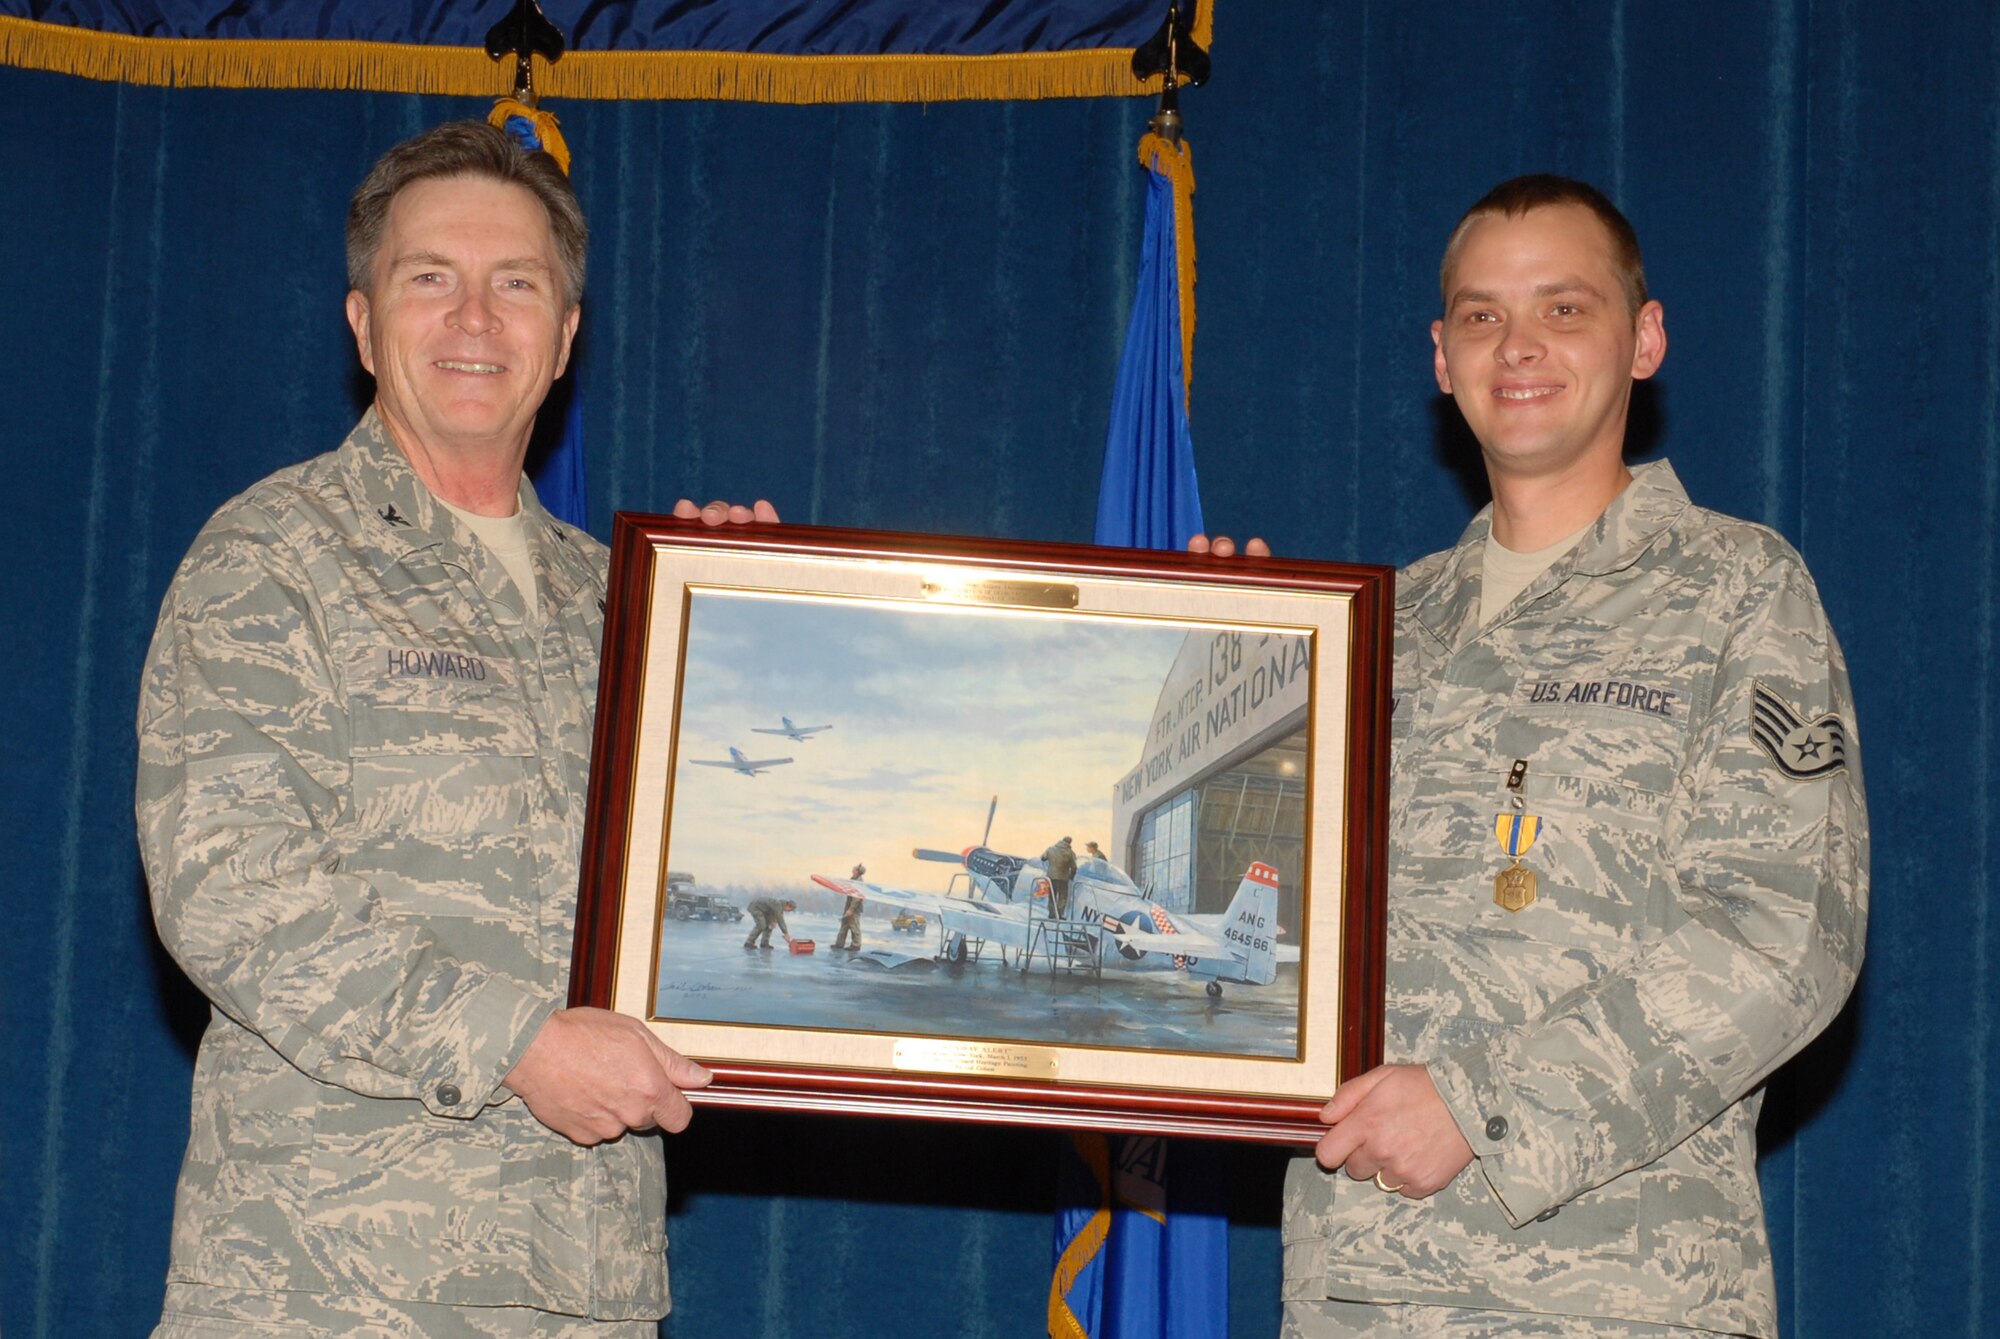 McGHEE TYSON AIR NATIONAL GUARD BASE, Tenn. -- Staff Sgt. Adam B. Thornton, right, an enlisted professional military education instructor, receives a heritage painting from Col. Richard B. Howard, commander, upon his departure from assignment at The I.G. Brown Air National Guard Training and Education Center here, Dec. 18, 2009.  (U.S. Air Force photograph by Master Sgt. Mavi Smith/Released)